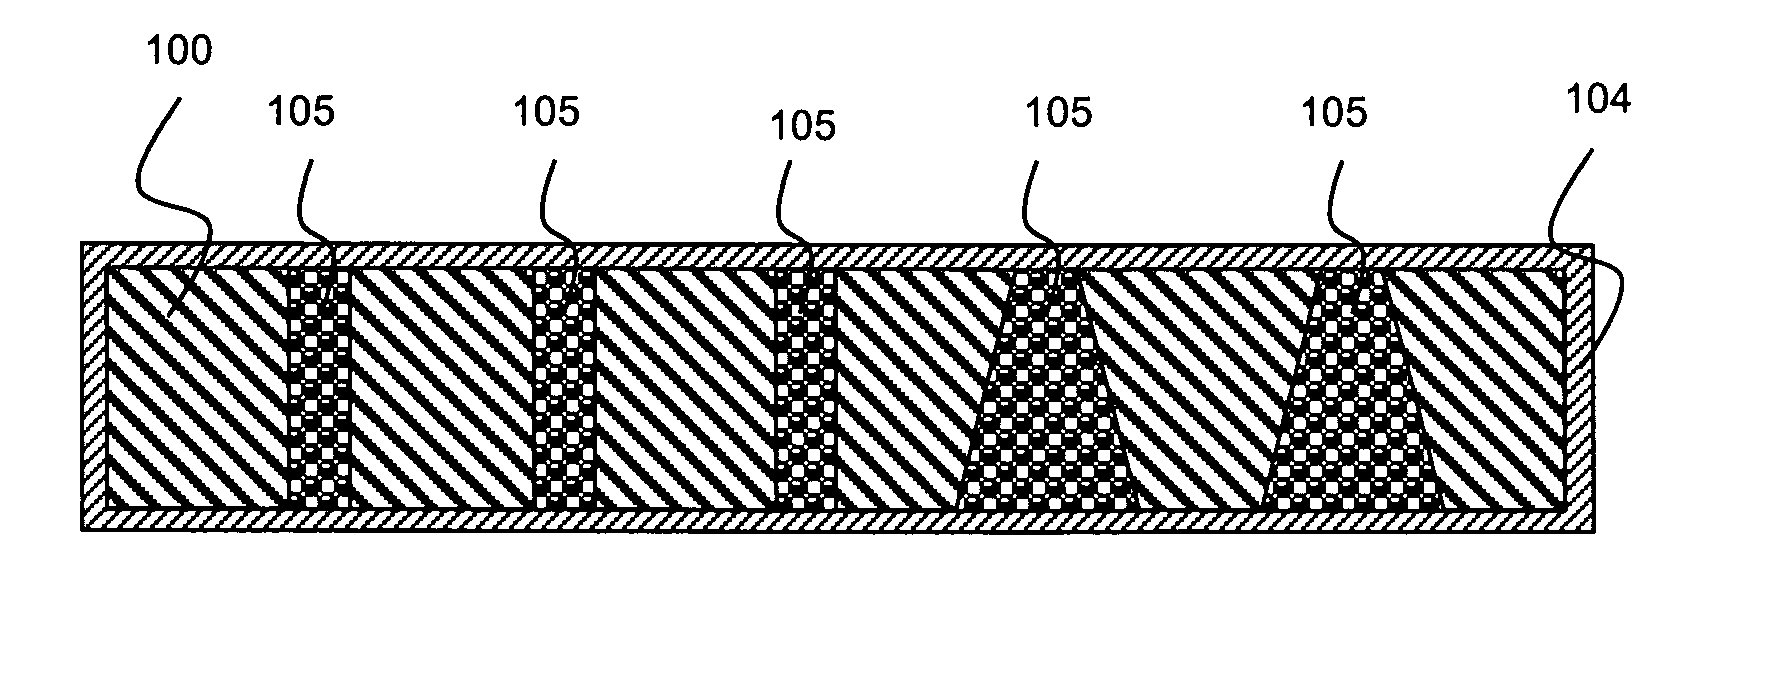 Medical articles having regions with polyelectrolyte multilayer coatings for regulating drug release